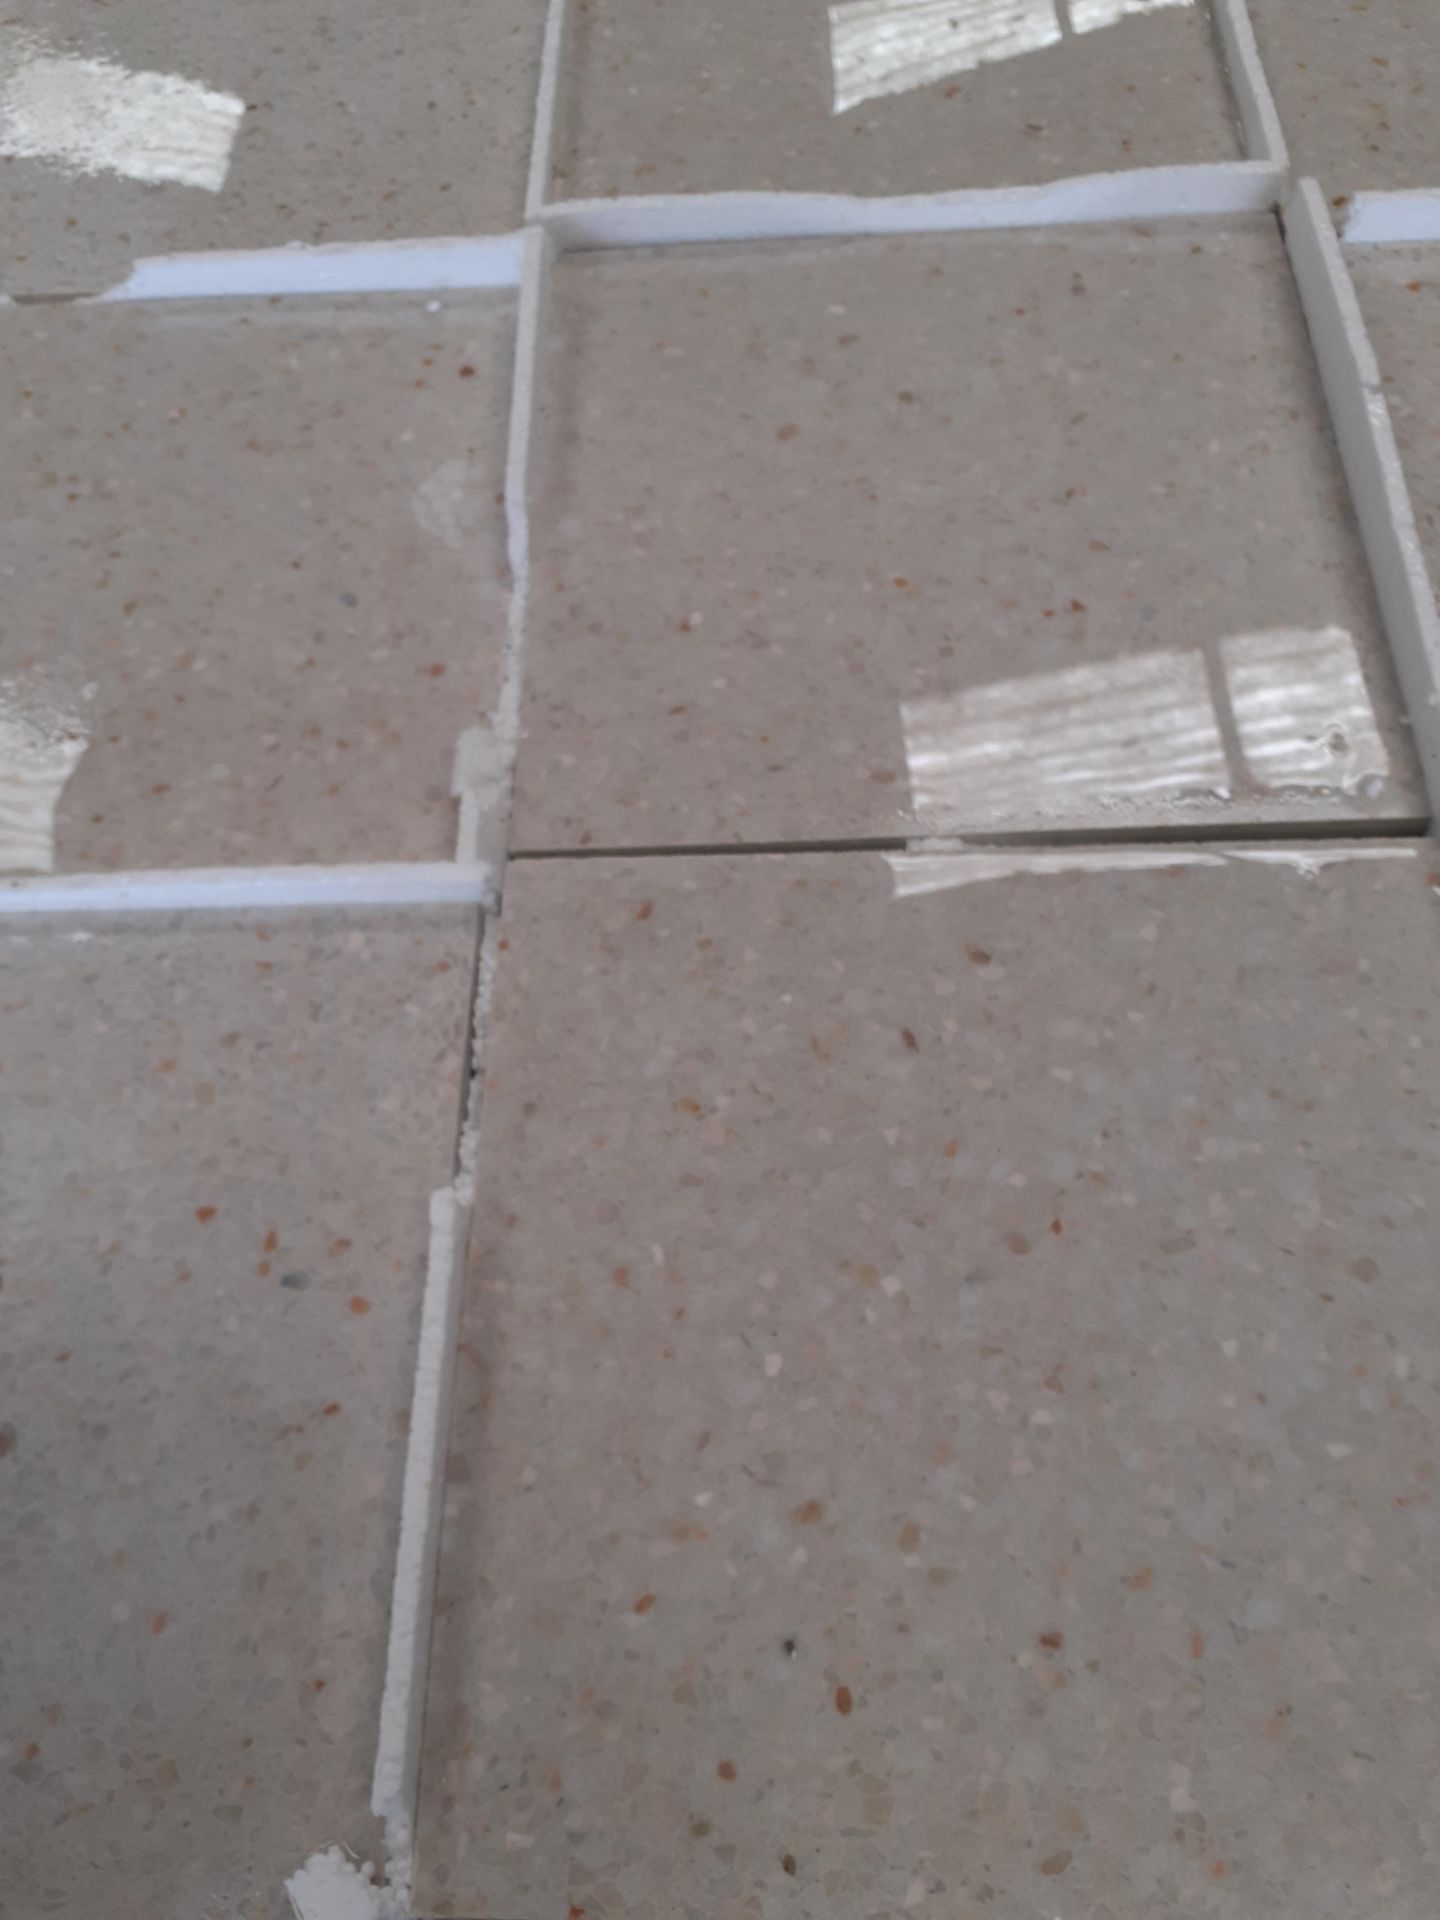 1 PALLET OF BRAND NEW TERRAZZO COMMERCIAL FLOOR TILES (Z30011), COVERS 24 SQUARE YARDS *PLUS VAT* - Image 2 of 6